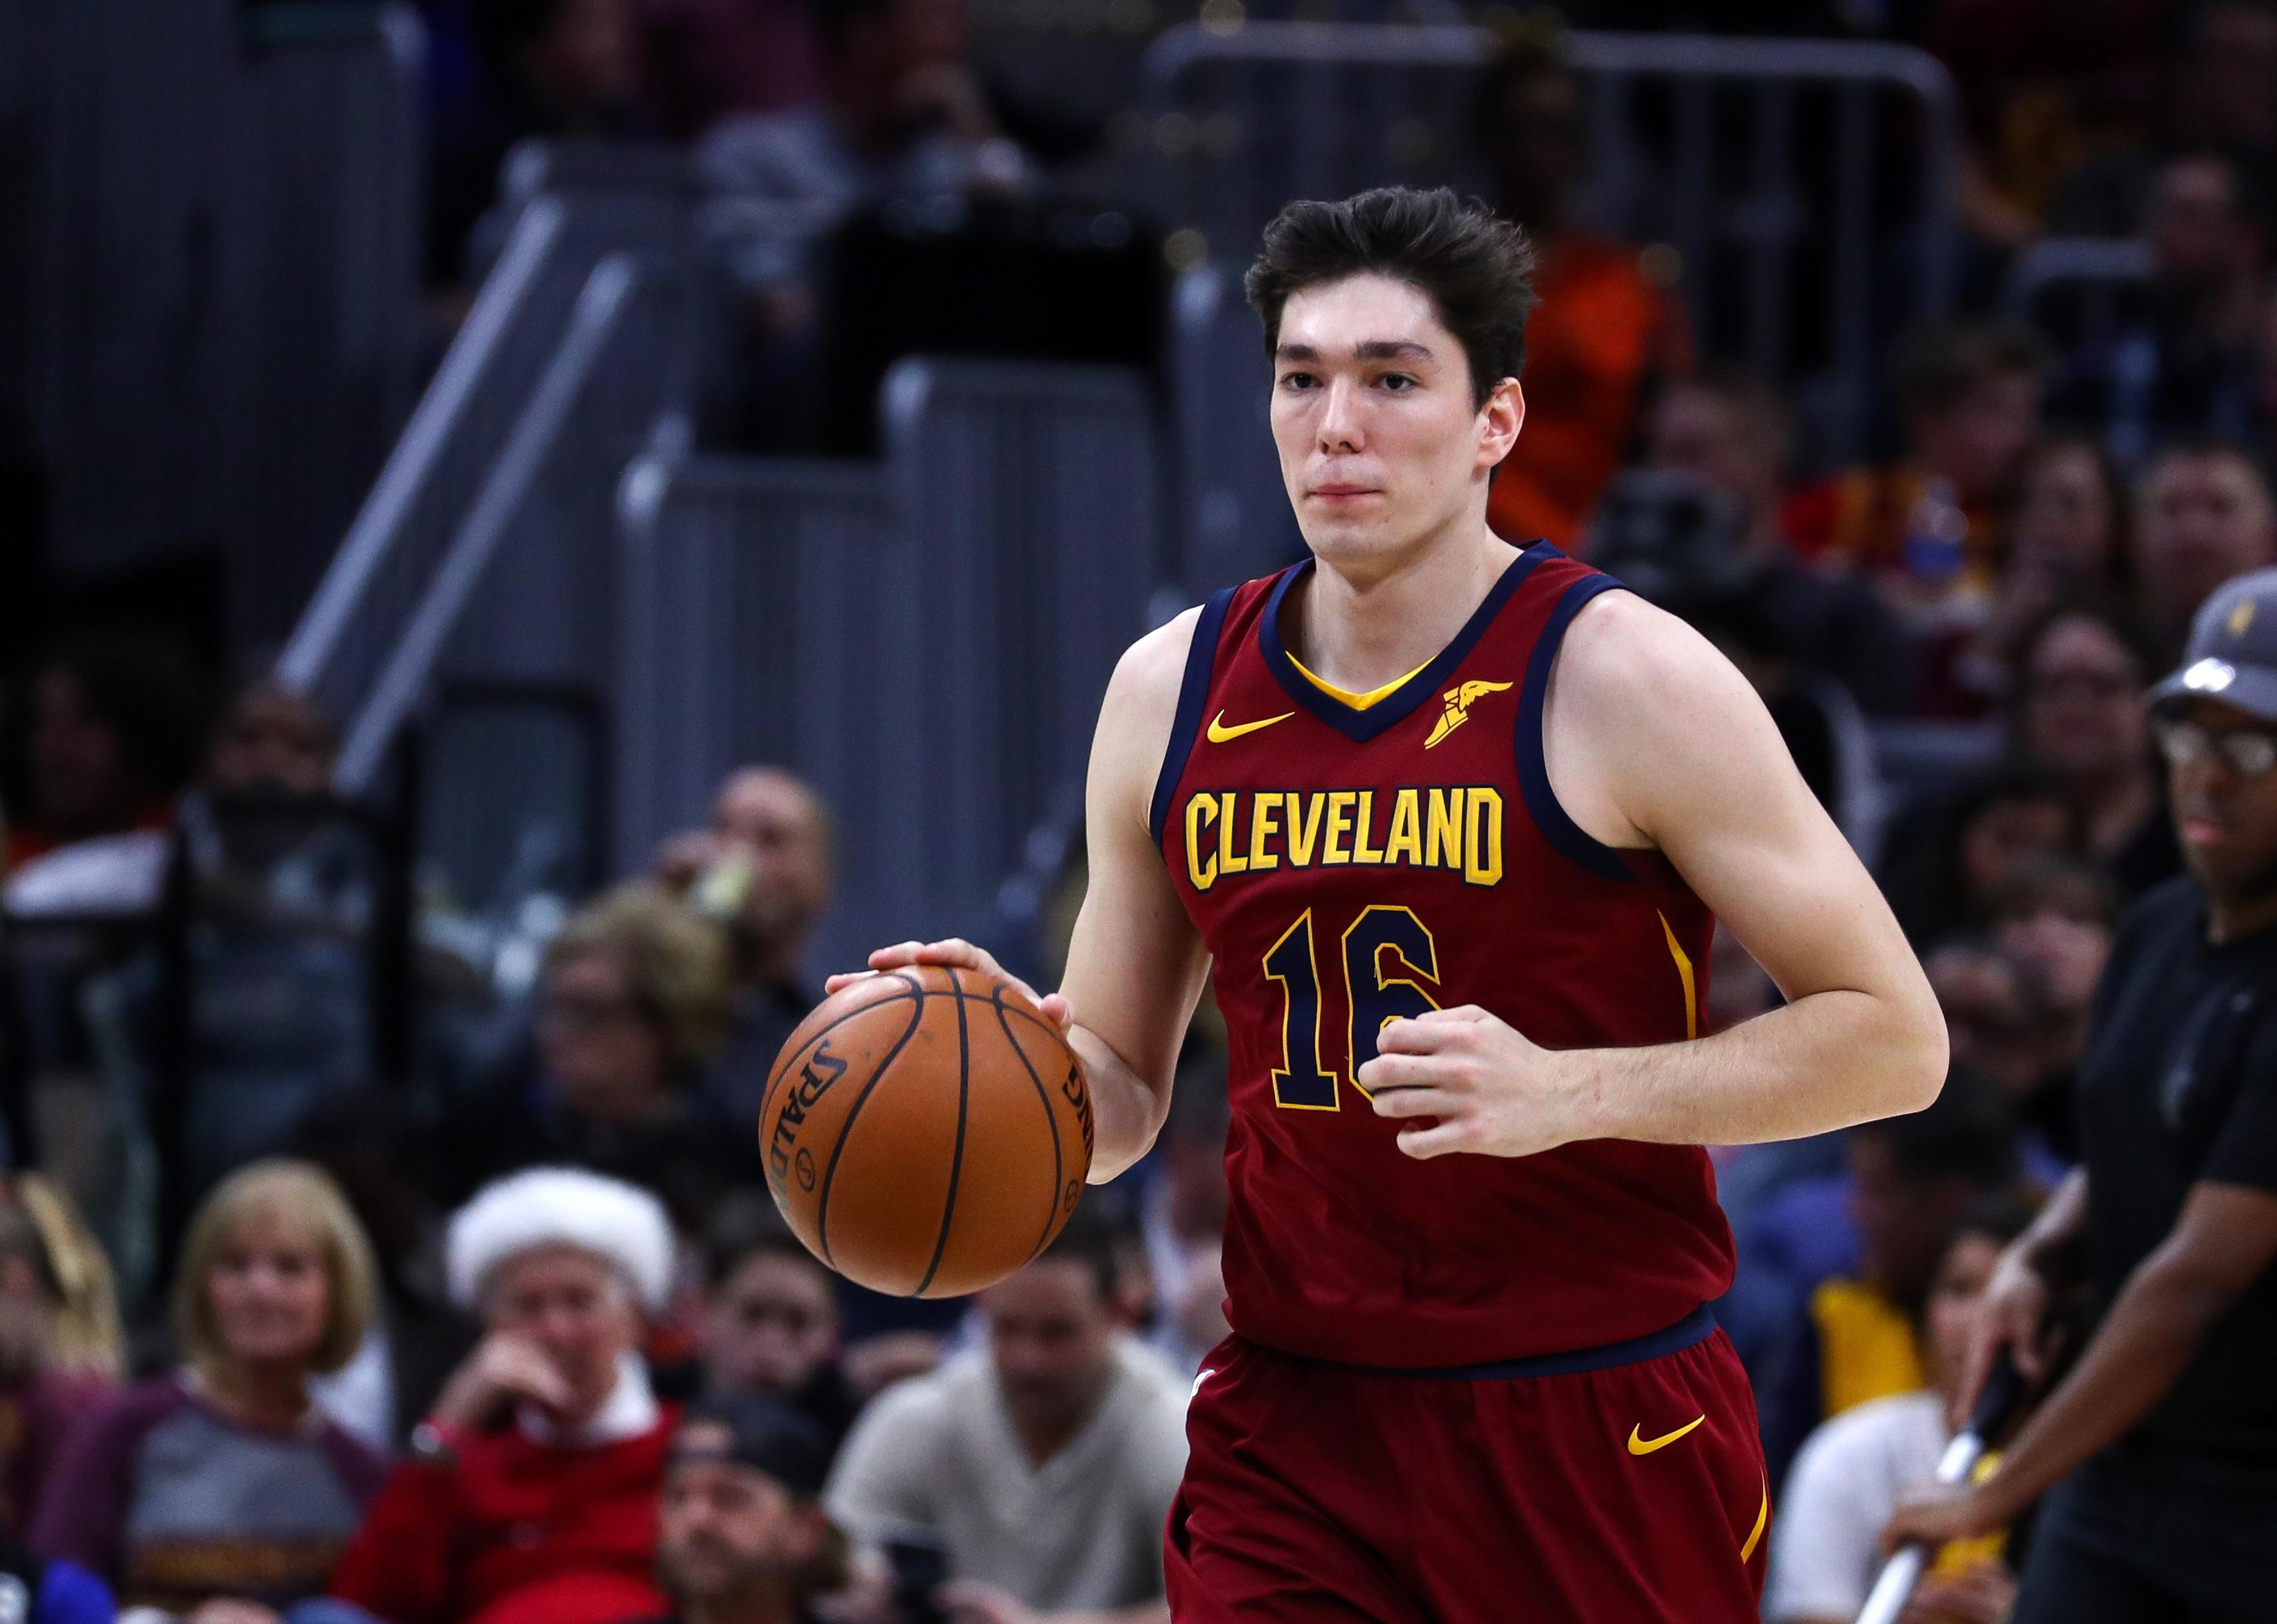 Cedi Osman in action during a game at Quicken Loans Arena in Cleveland.